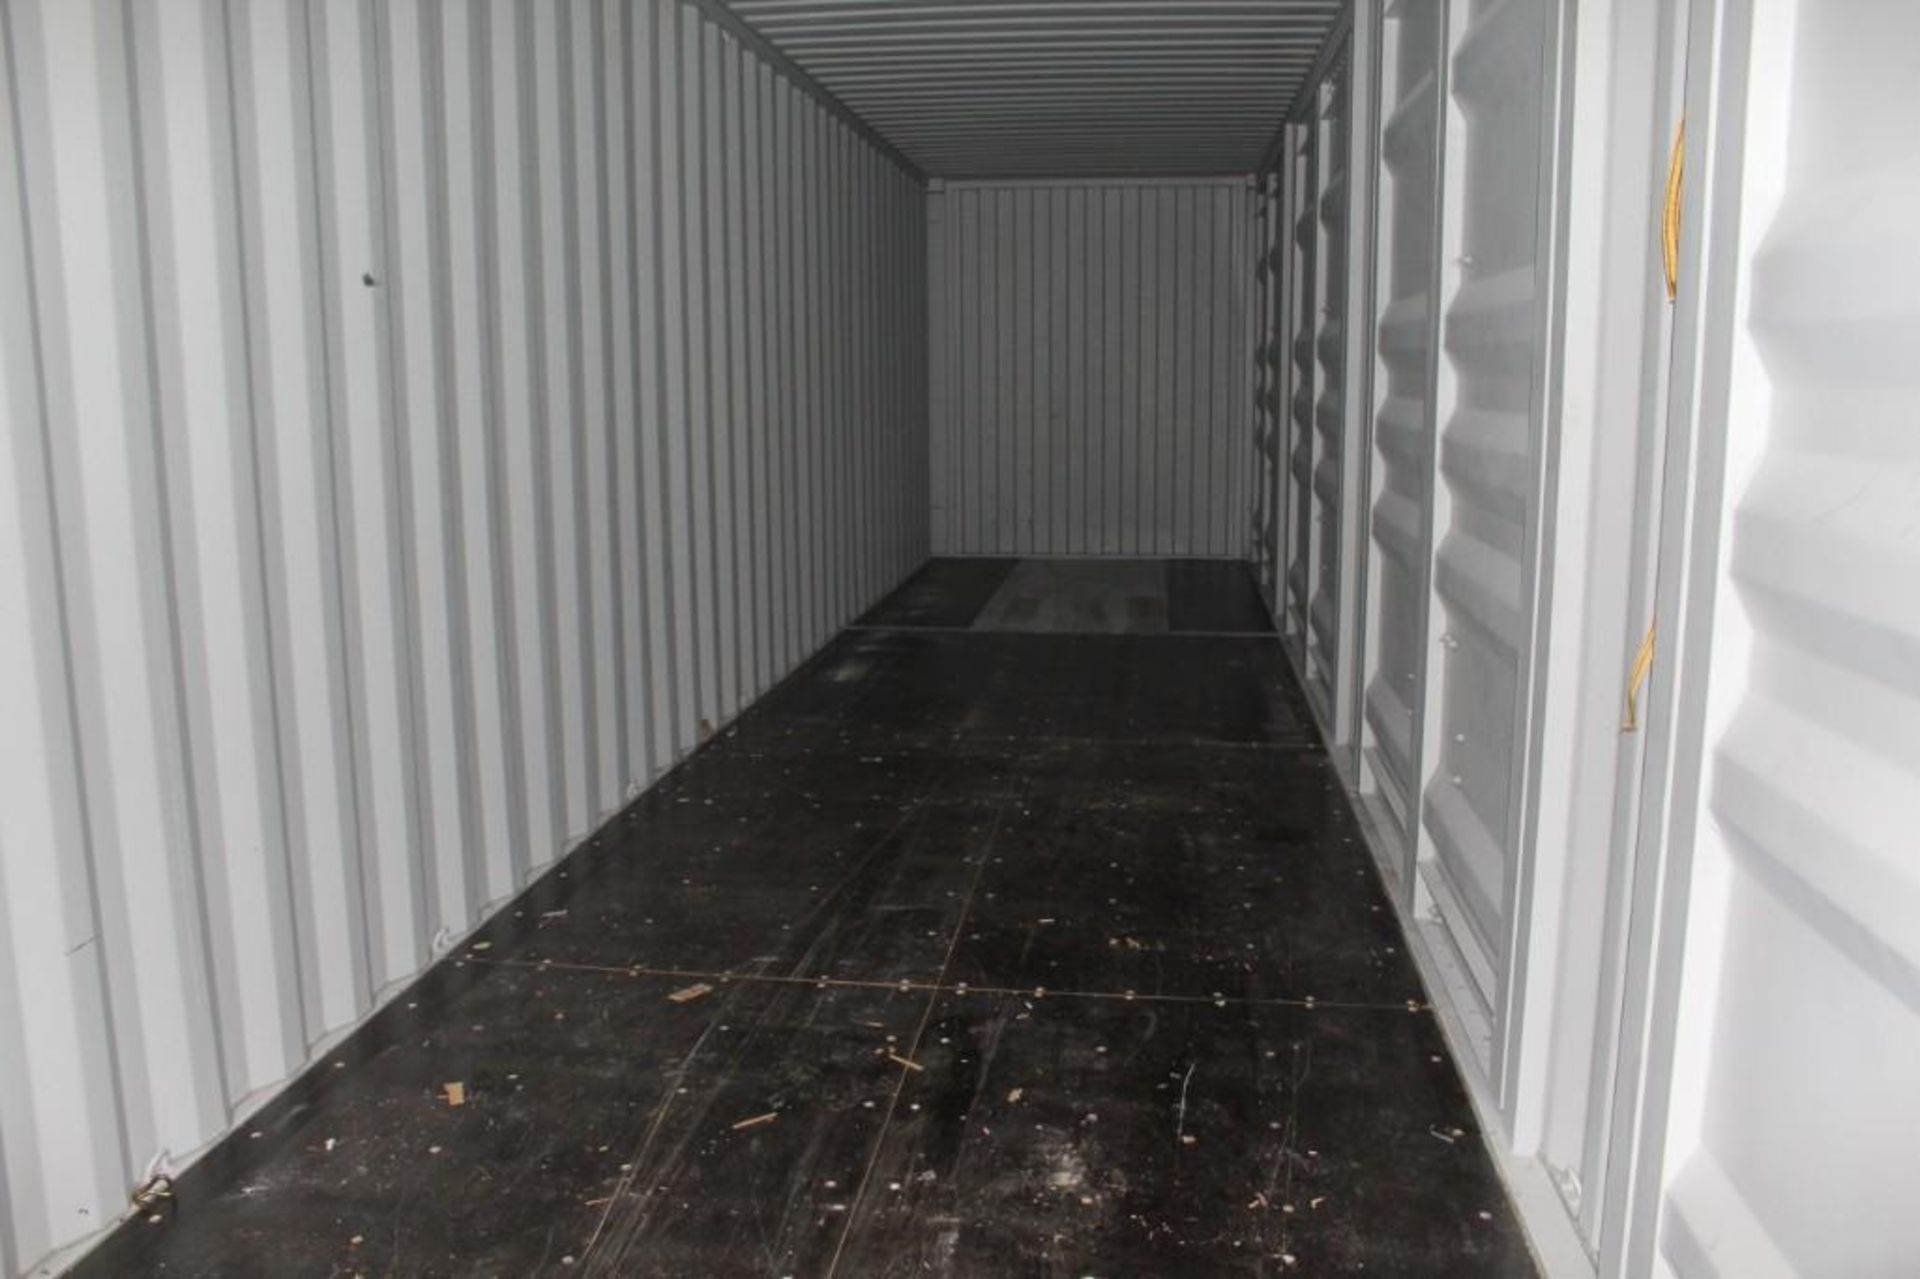 New One Trip 40' High Cube Multi Door Container - Image 7 of 7